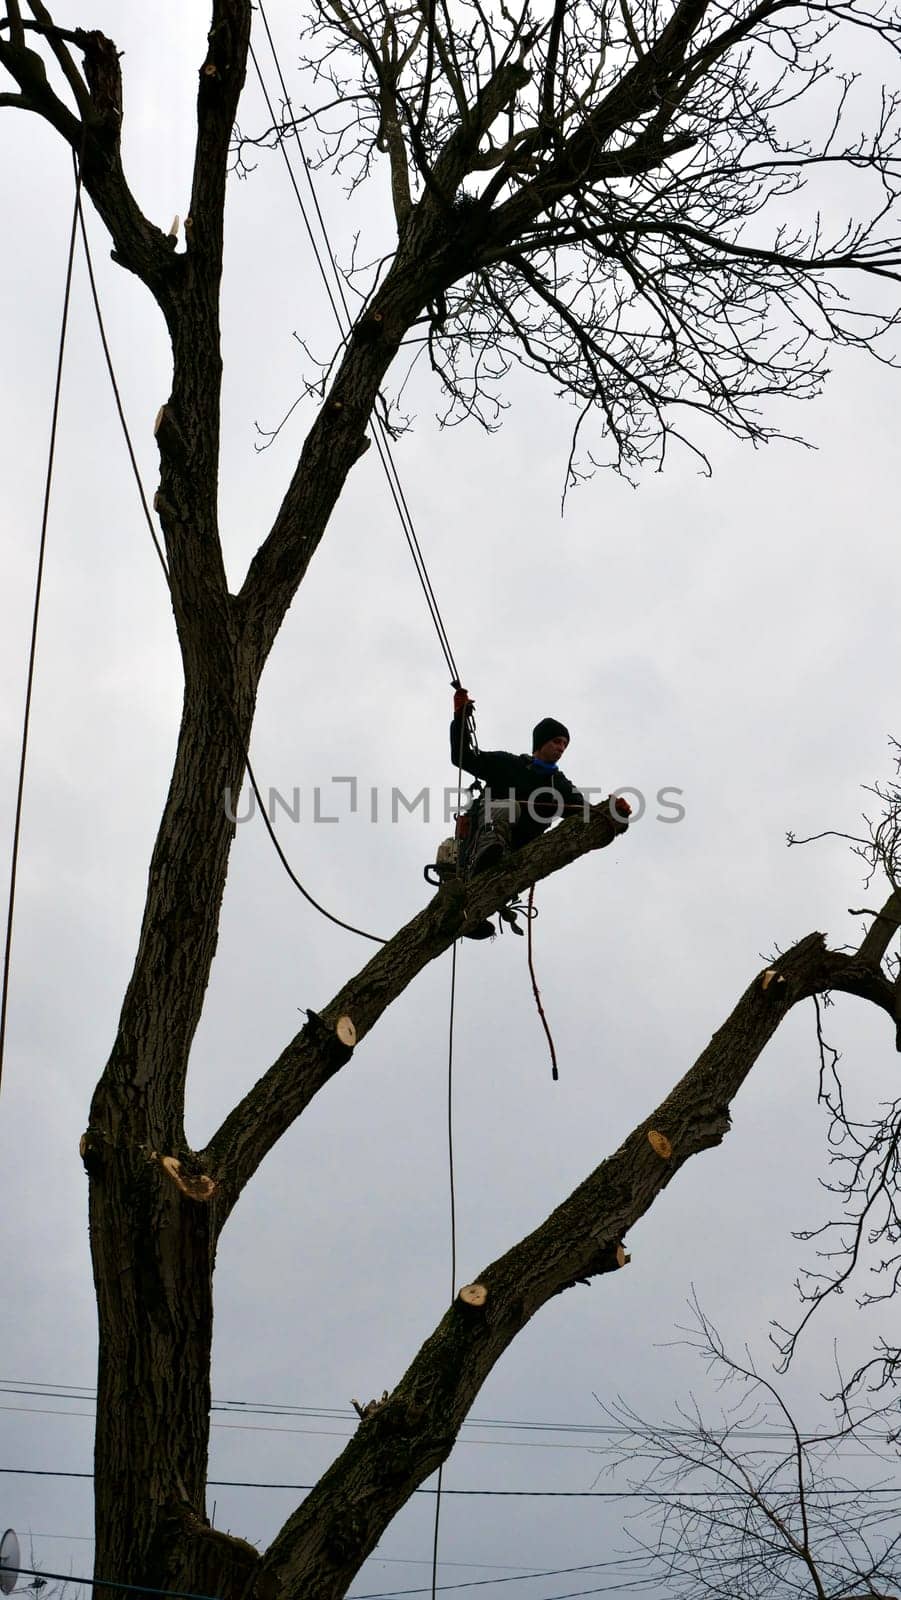 Arborist in Gear Removes Tree Branch with Chainsaw by OksanaFedorchuk